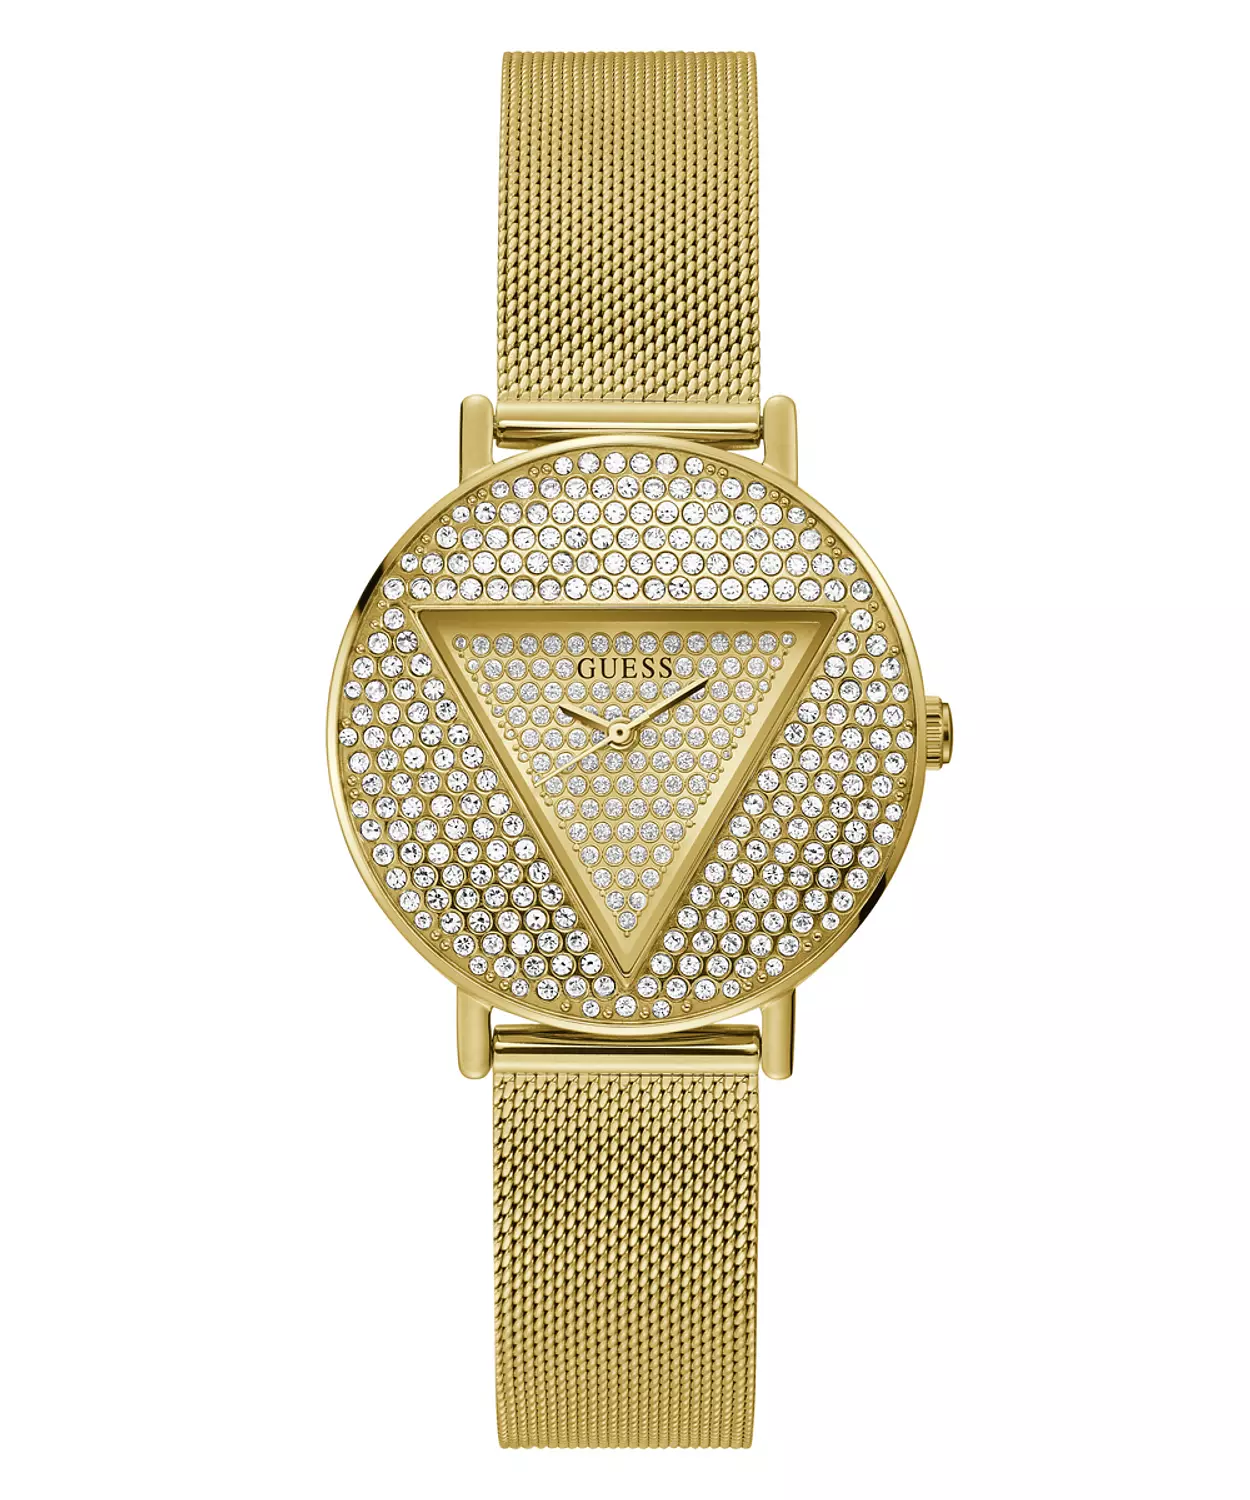 GUESS GW0477L2 ANALOG WATCH  For Women Gold Stainless Steel/Mesh Polished Bracelet  0